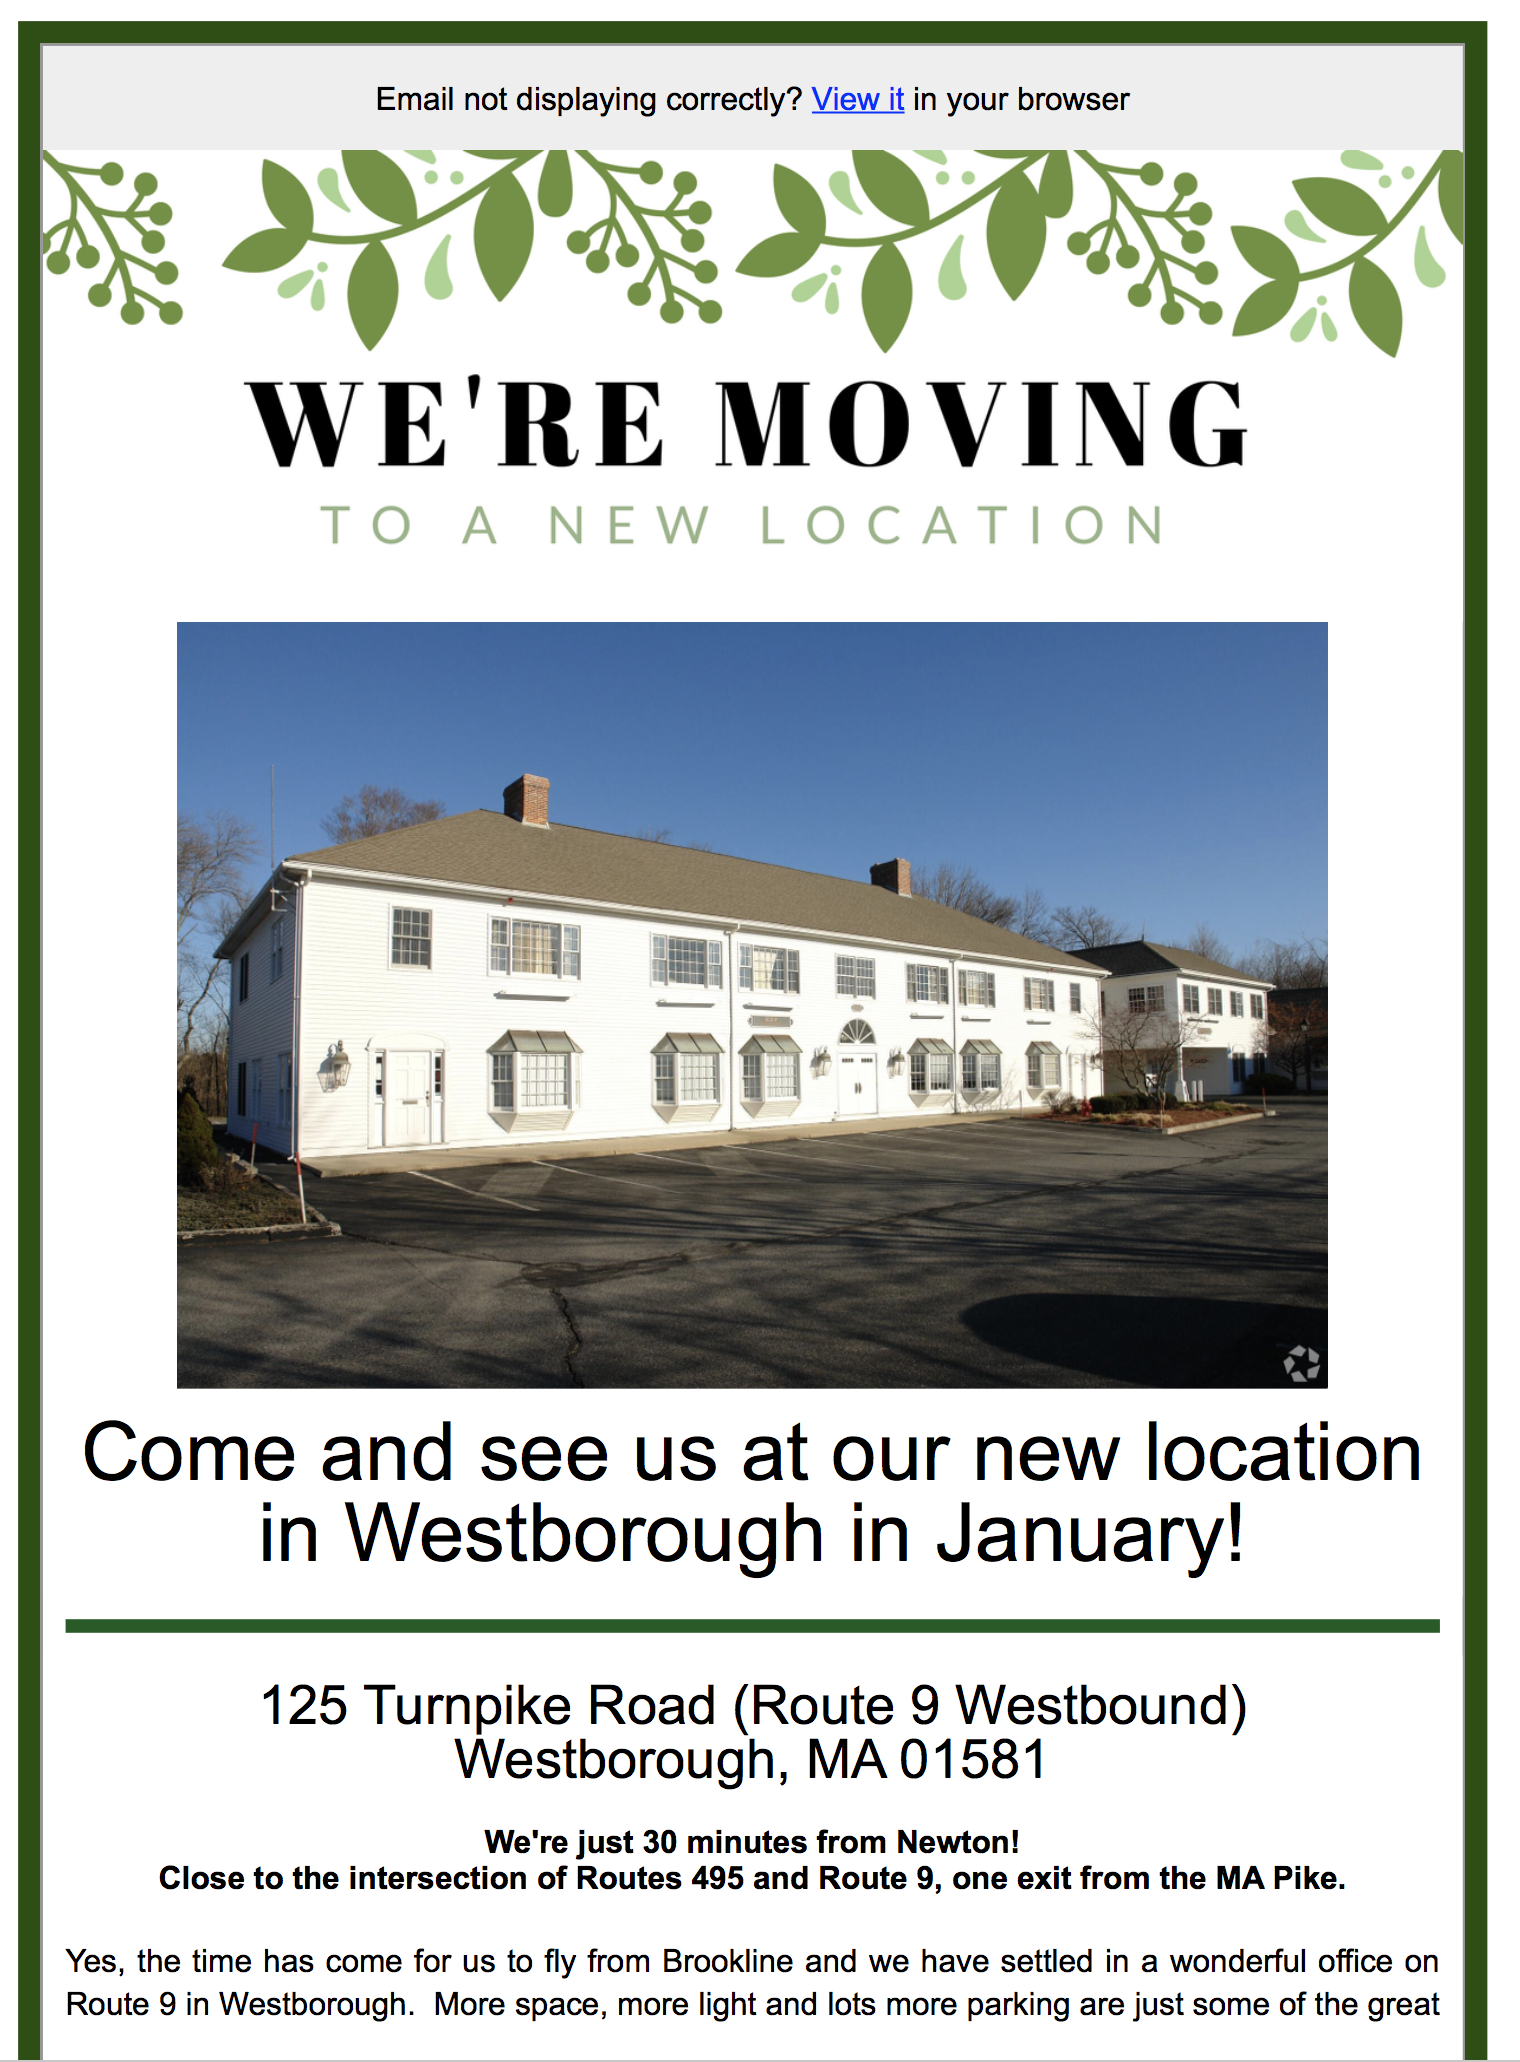 We're Moving from Brookline December 2020